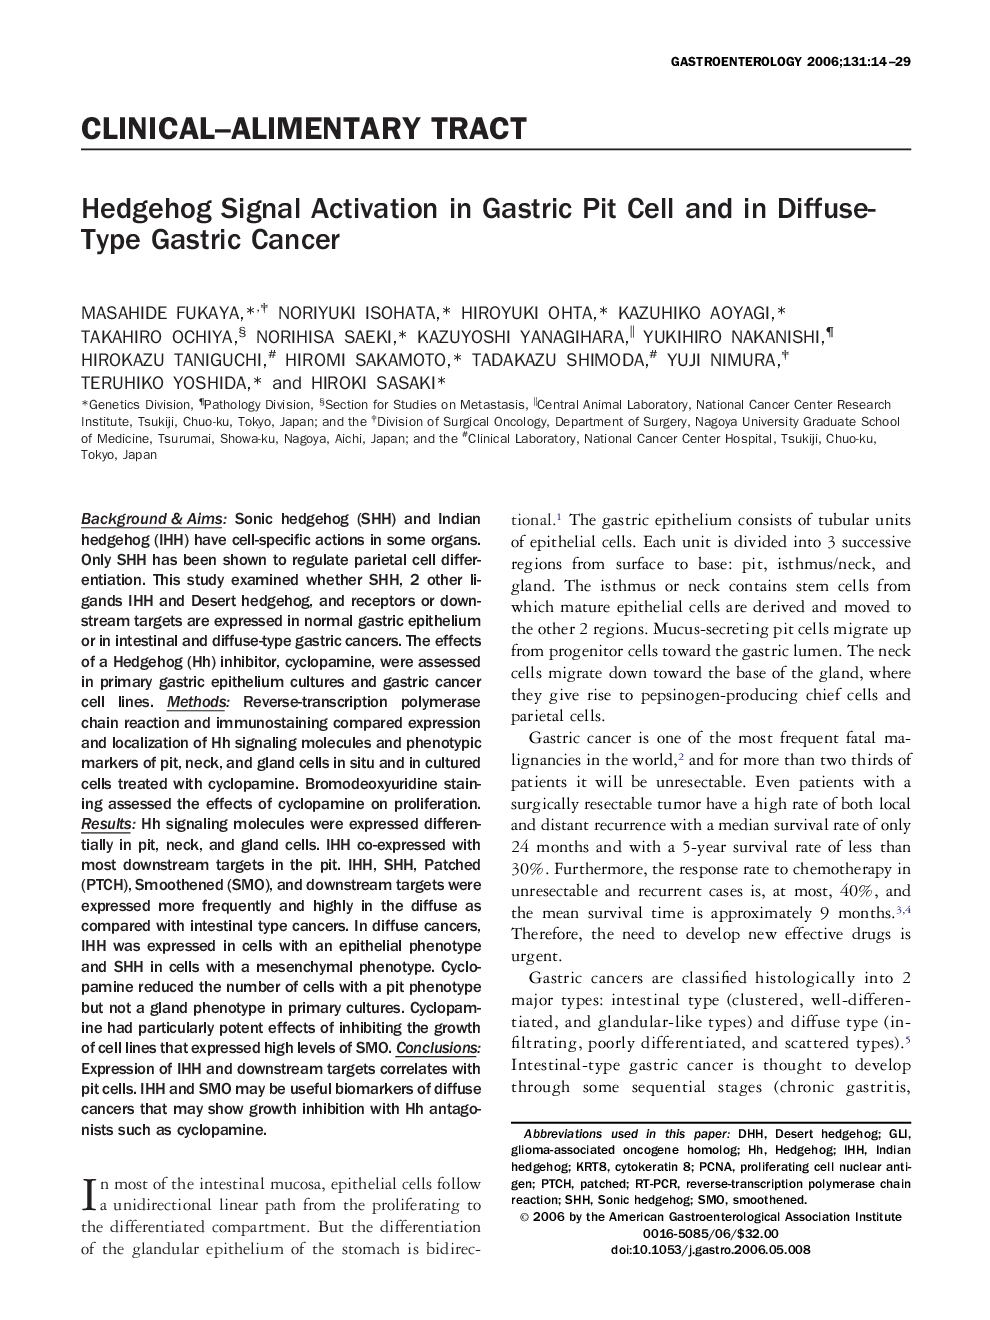 Hedgehog Signal Activation in Gastric Pit Cell and in Diffuse-Type Gastric Cancer 